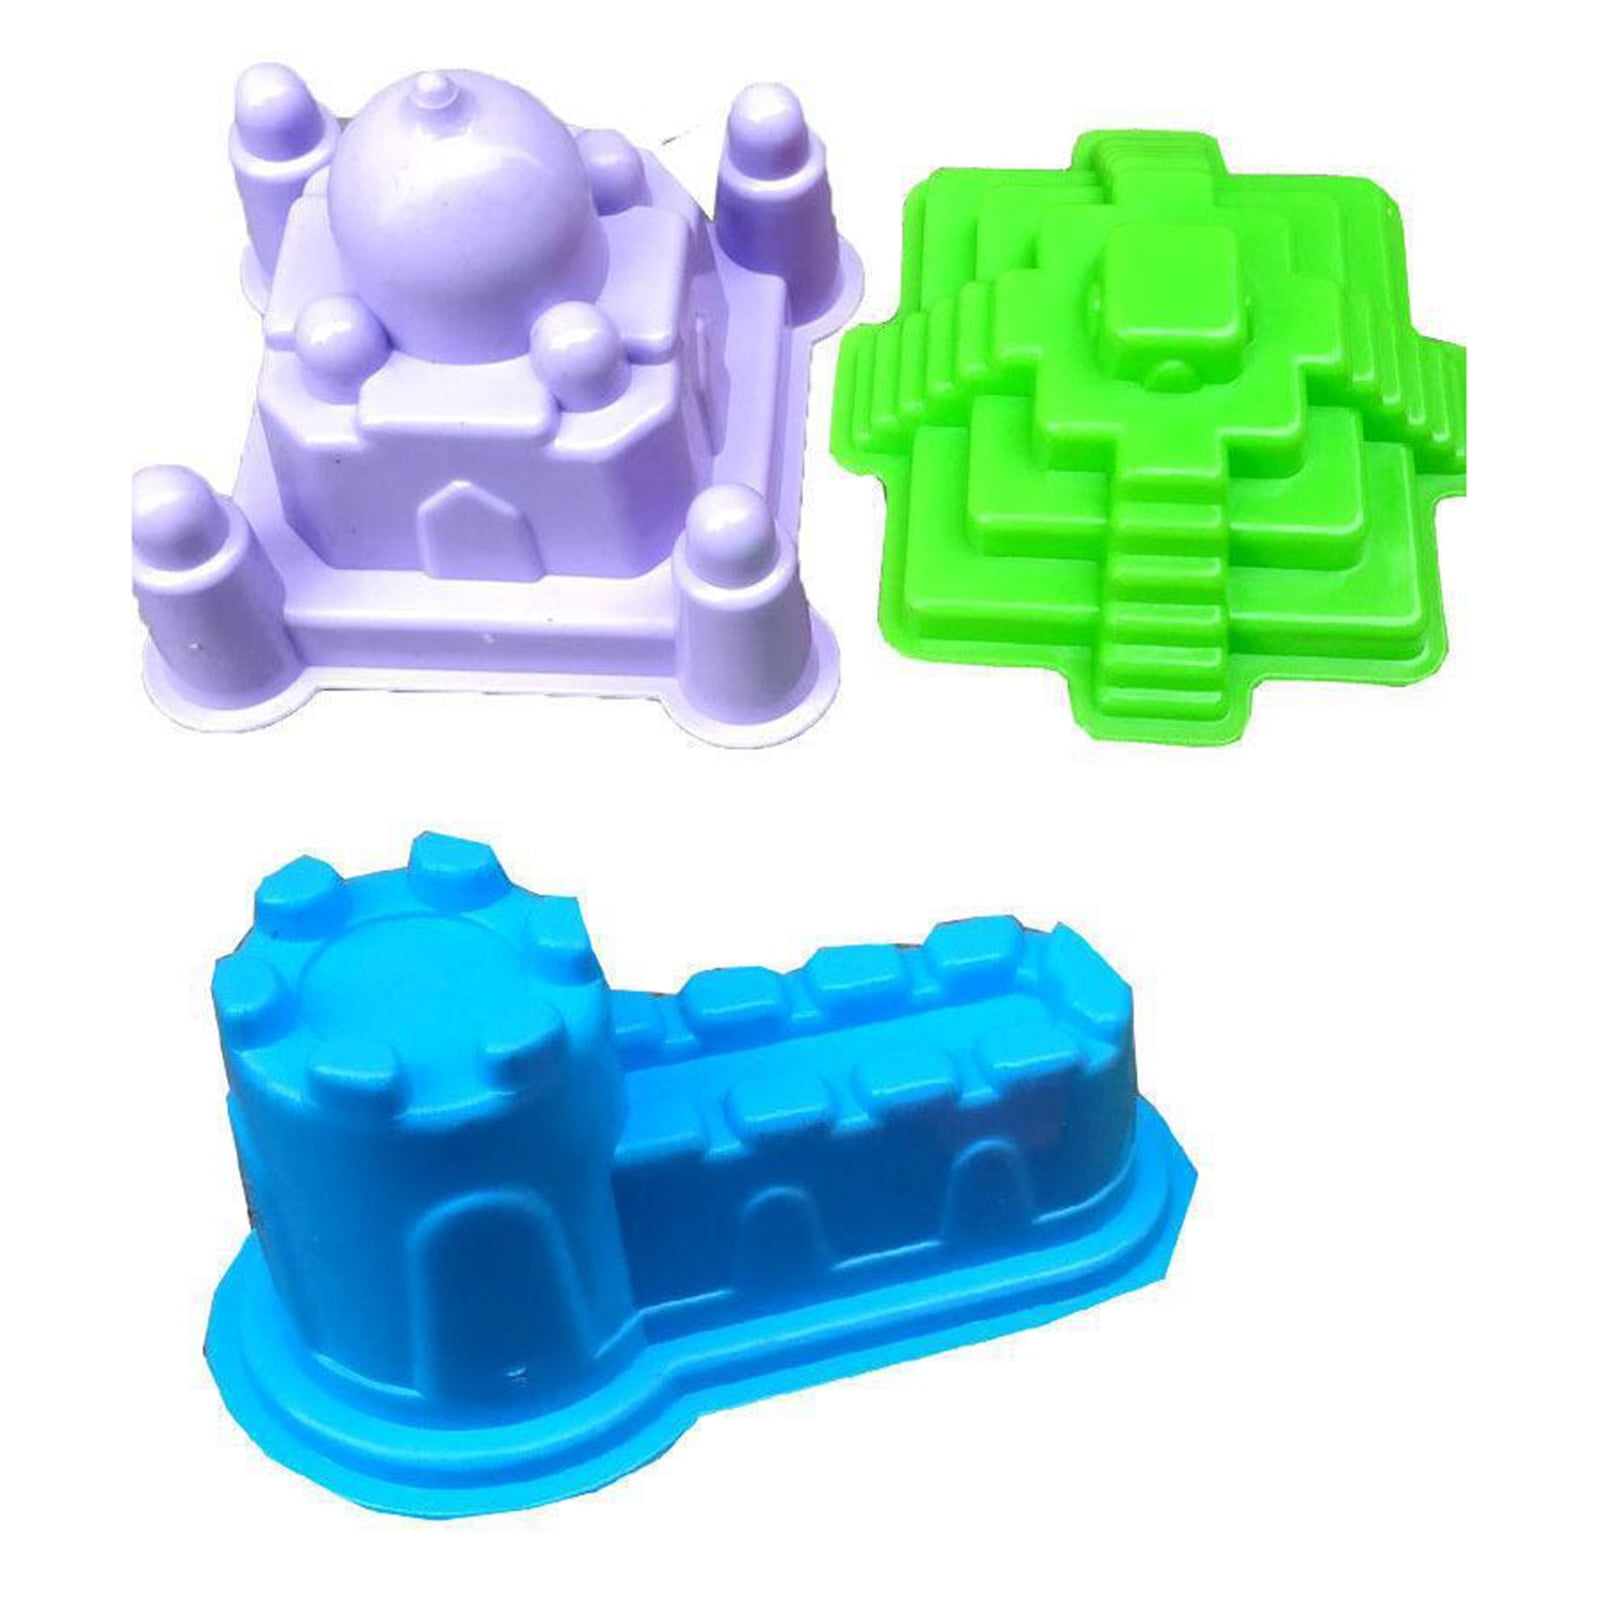 Toy Mold Set: Over 297 Royalty-Free Licensable Stock Illustrations